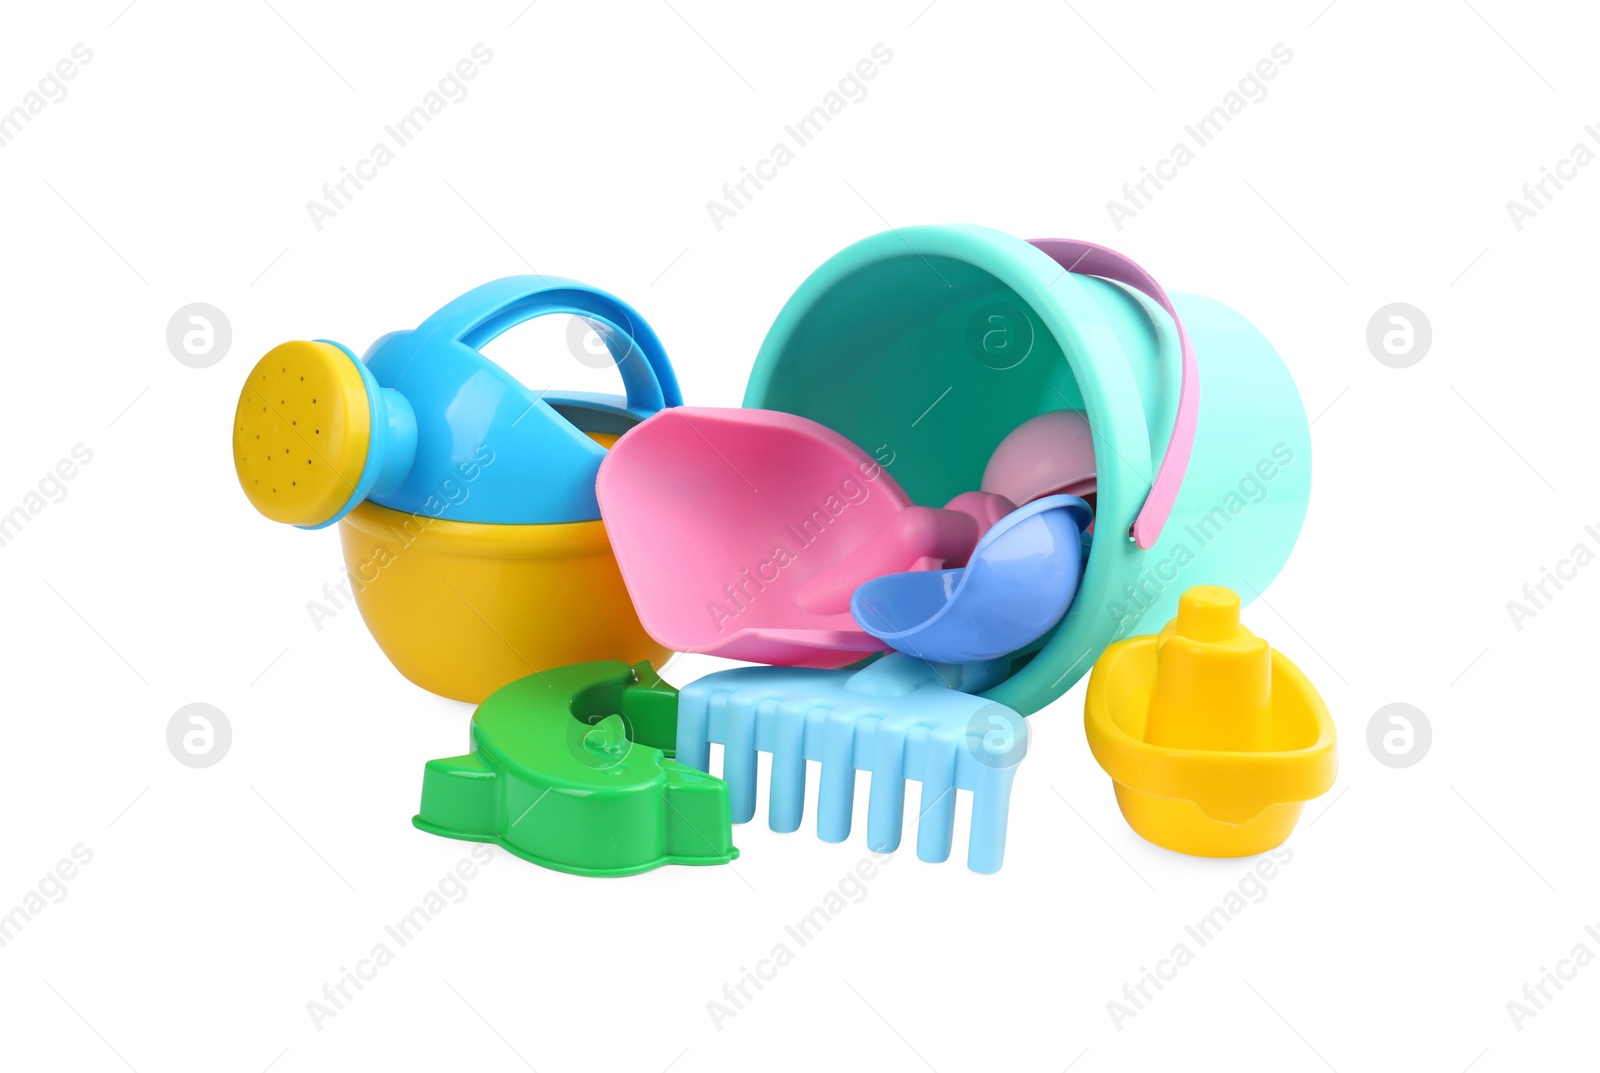 Photo of Set of children's plastic toys isolated on white